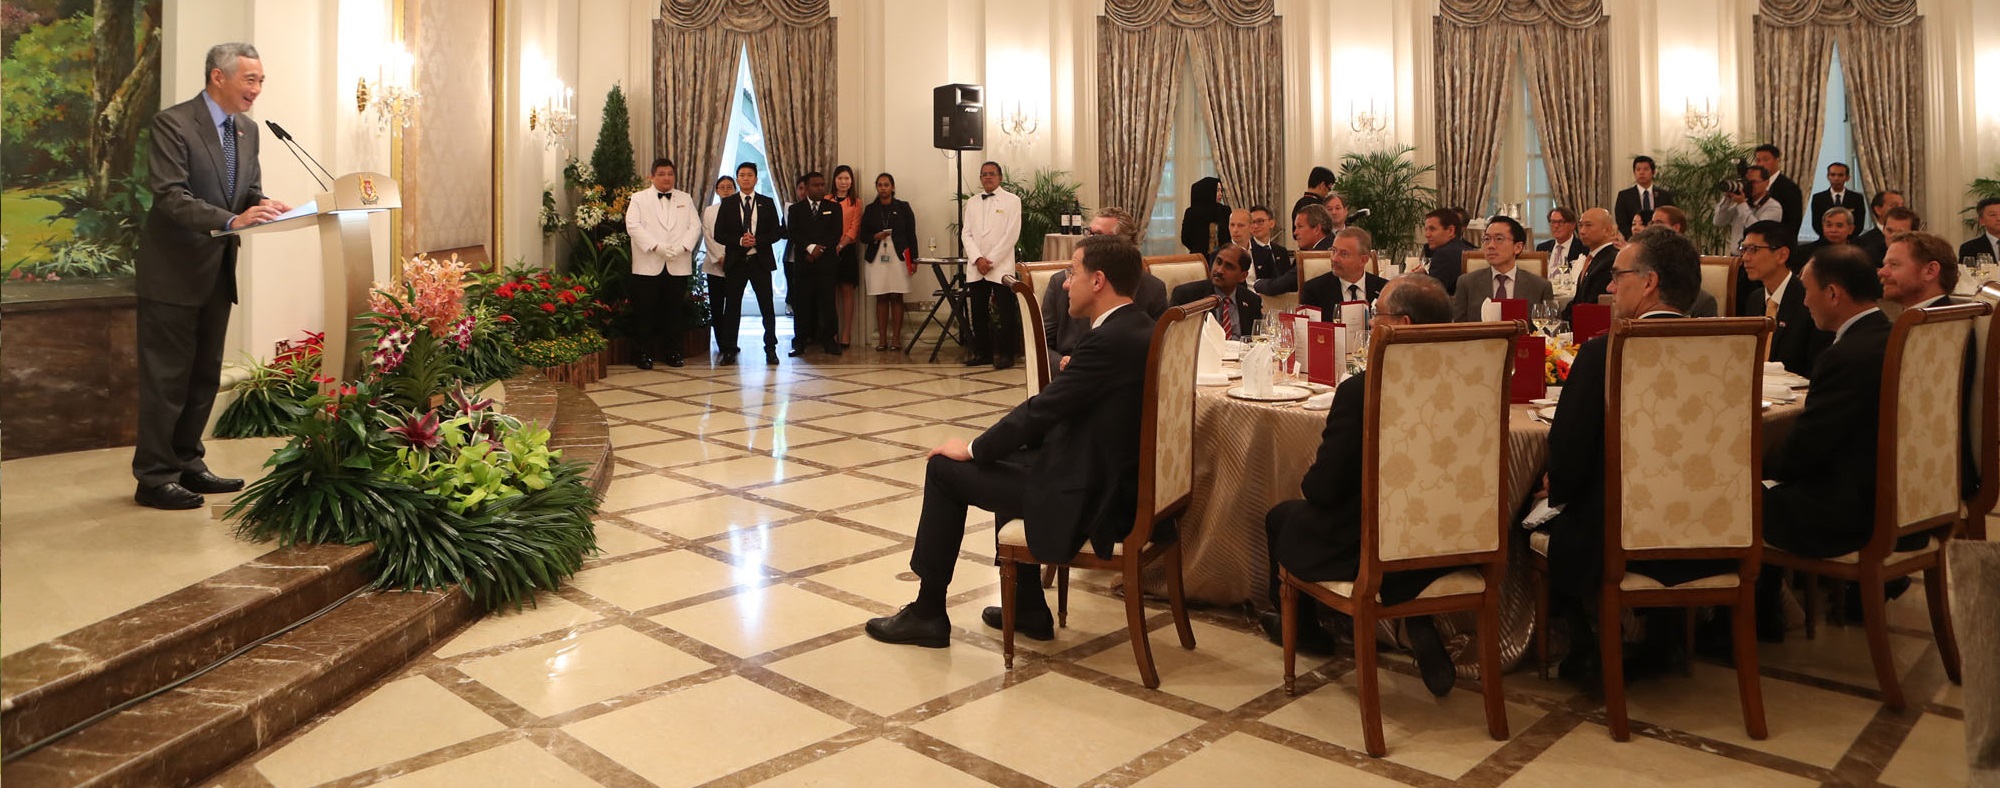 PM Lee Hsien Loong at the Official Lunch hosted in honour of Netherlands PM Mark Rutte